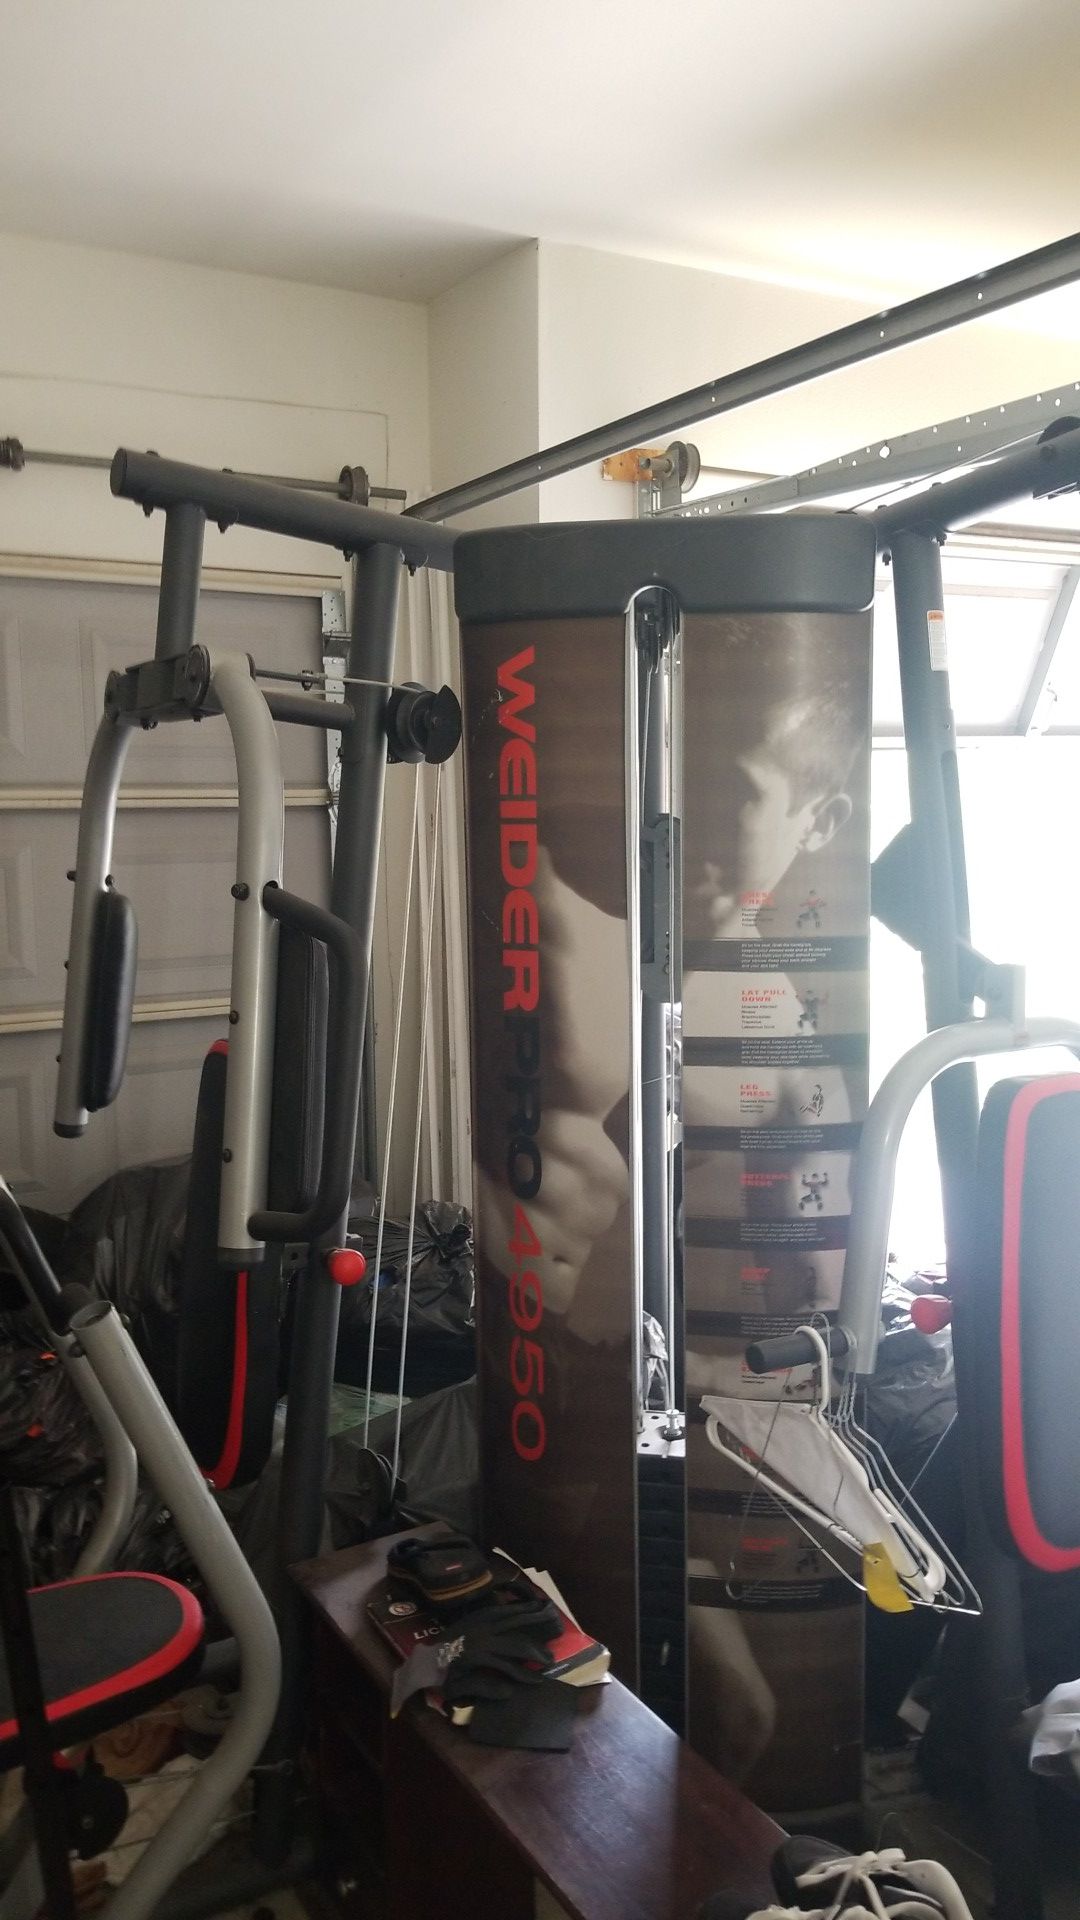 Weider gym set. For free just have to pick up. You can bench , do flys , shoulder press ,arms and legs!!